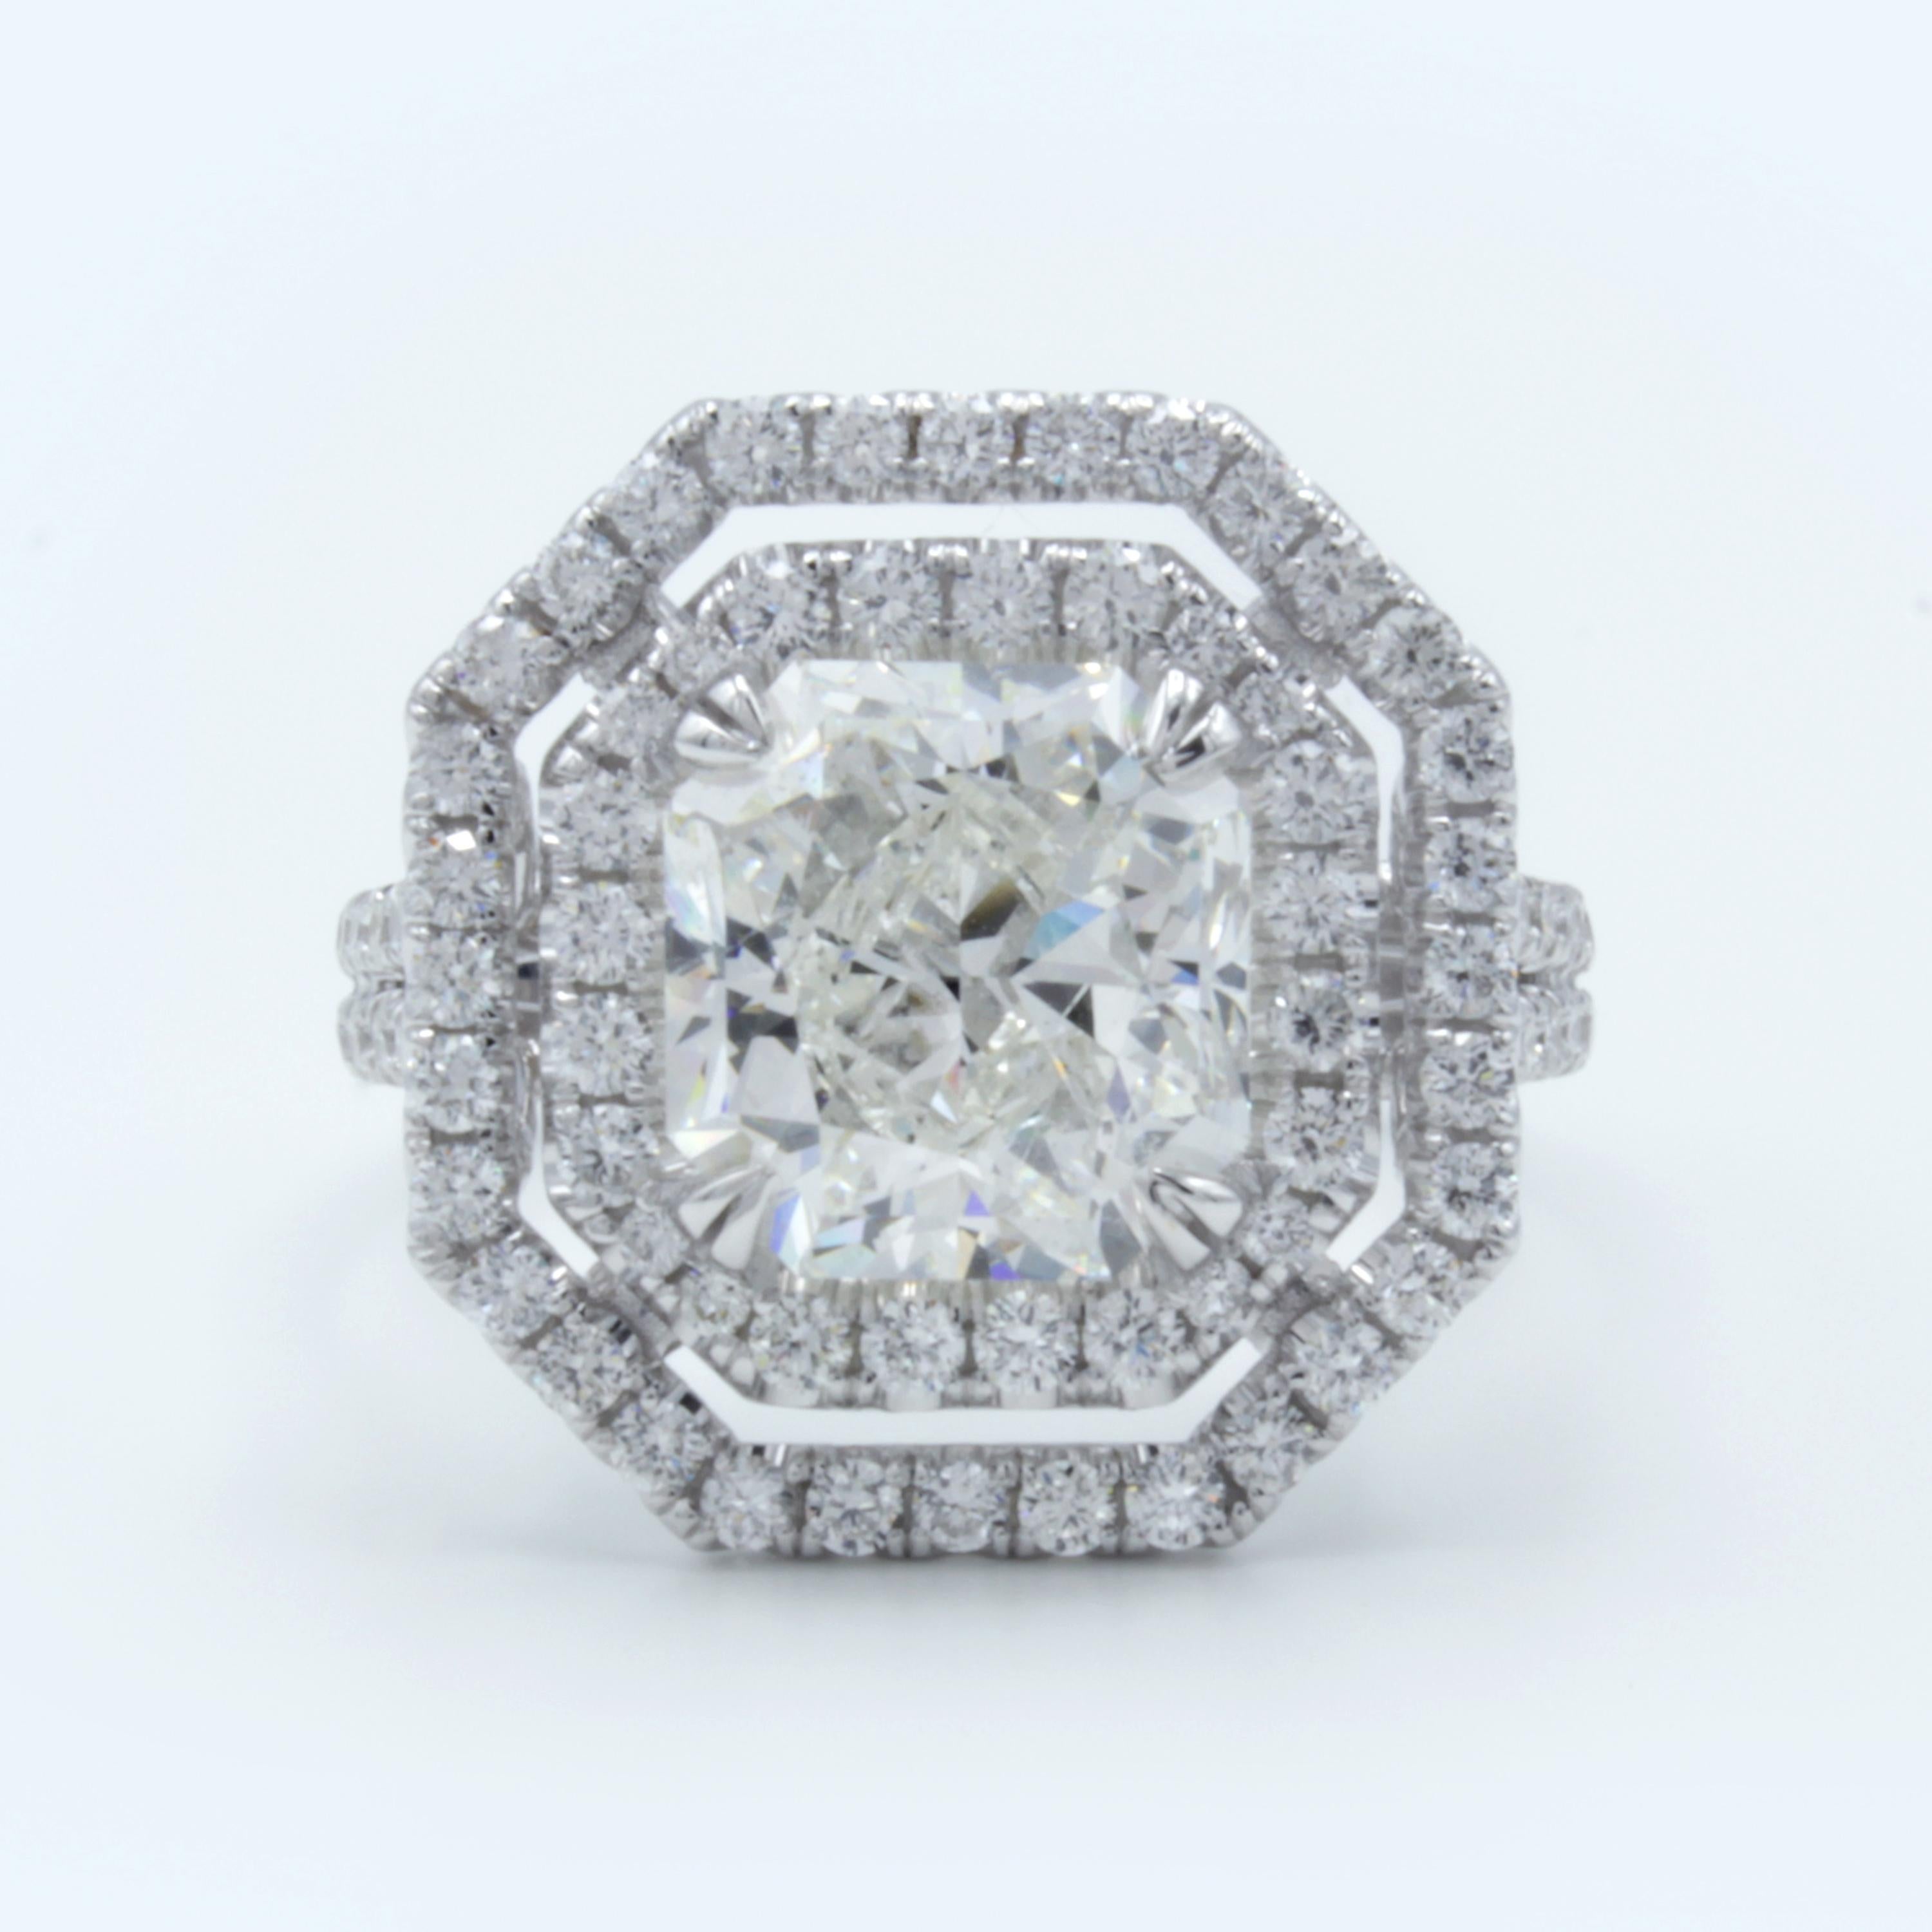 A remarkable Rosenberg Diamonds & Co. engagement ring featuring a GIA certified 3.51 carat radiant cut diamond within a band of 18Kt white gold. The setting shows a beautiful double halo split shank design glittering with round brilliant pave set